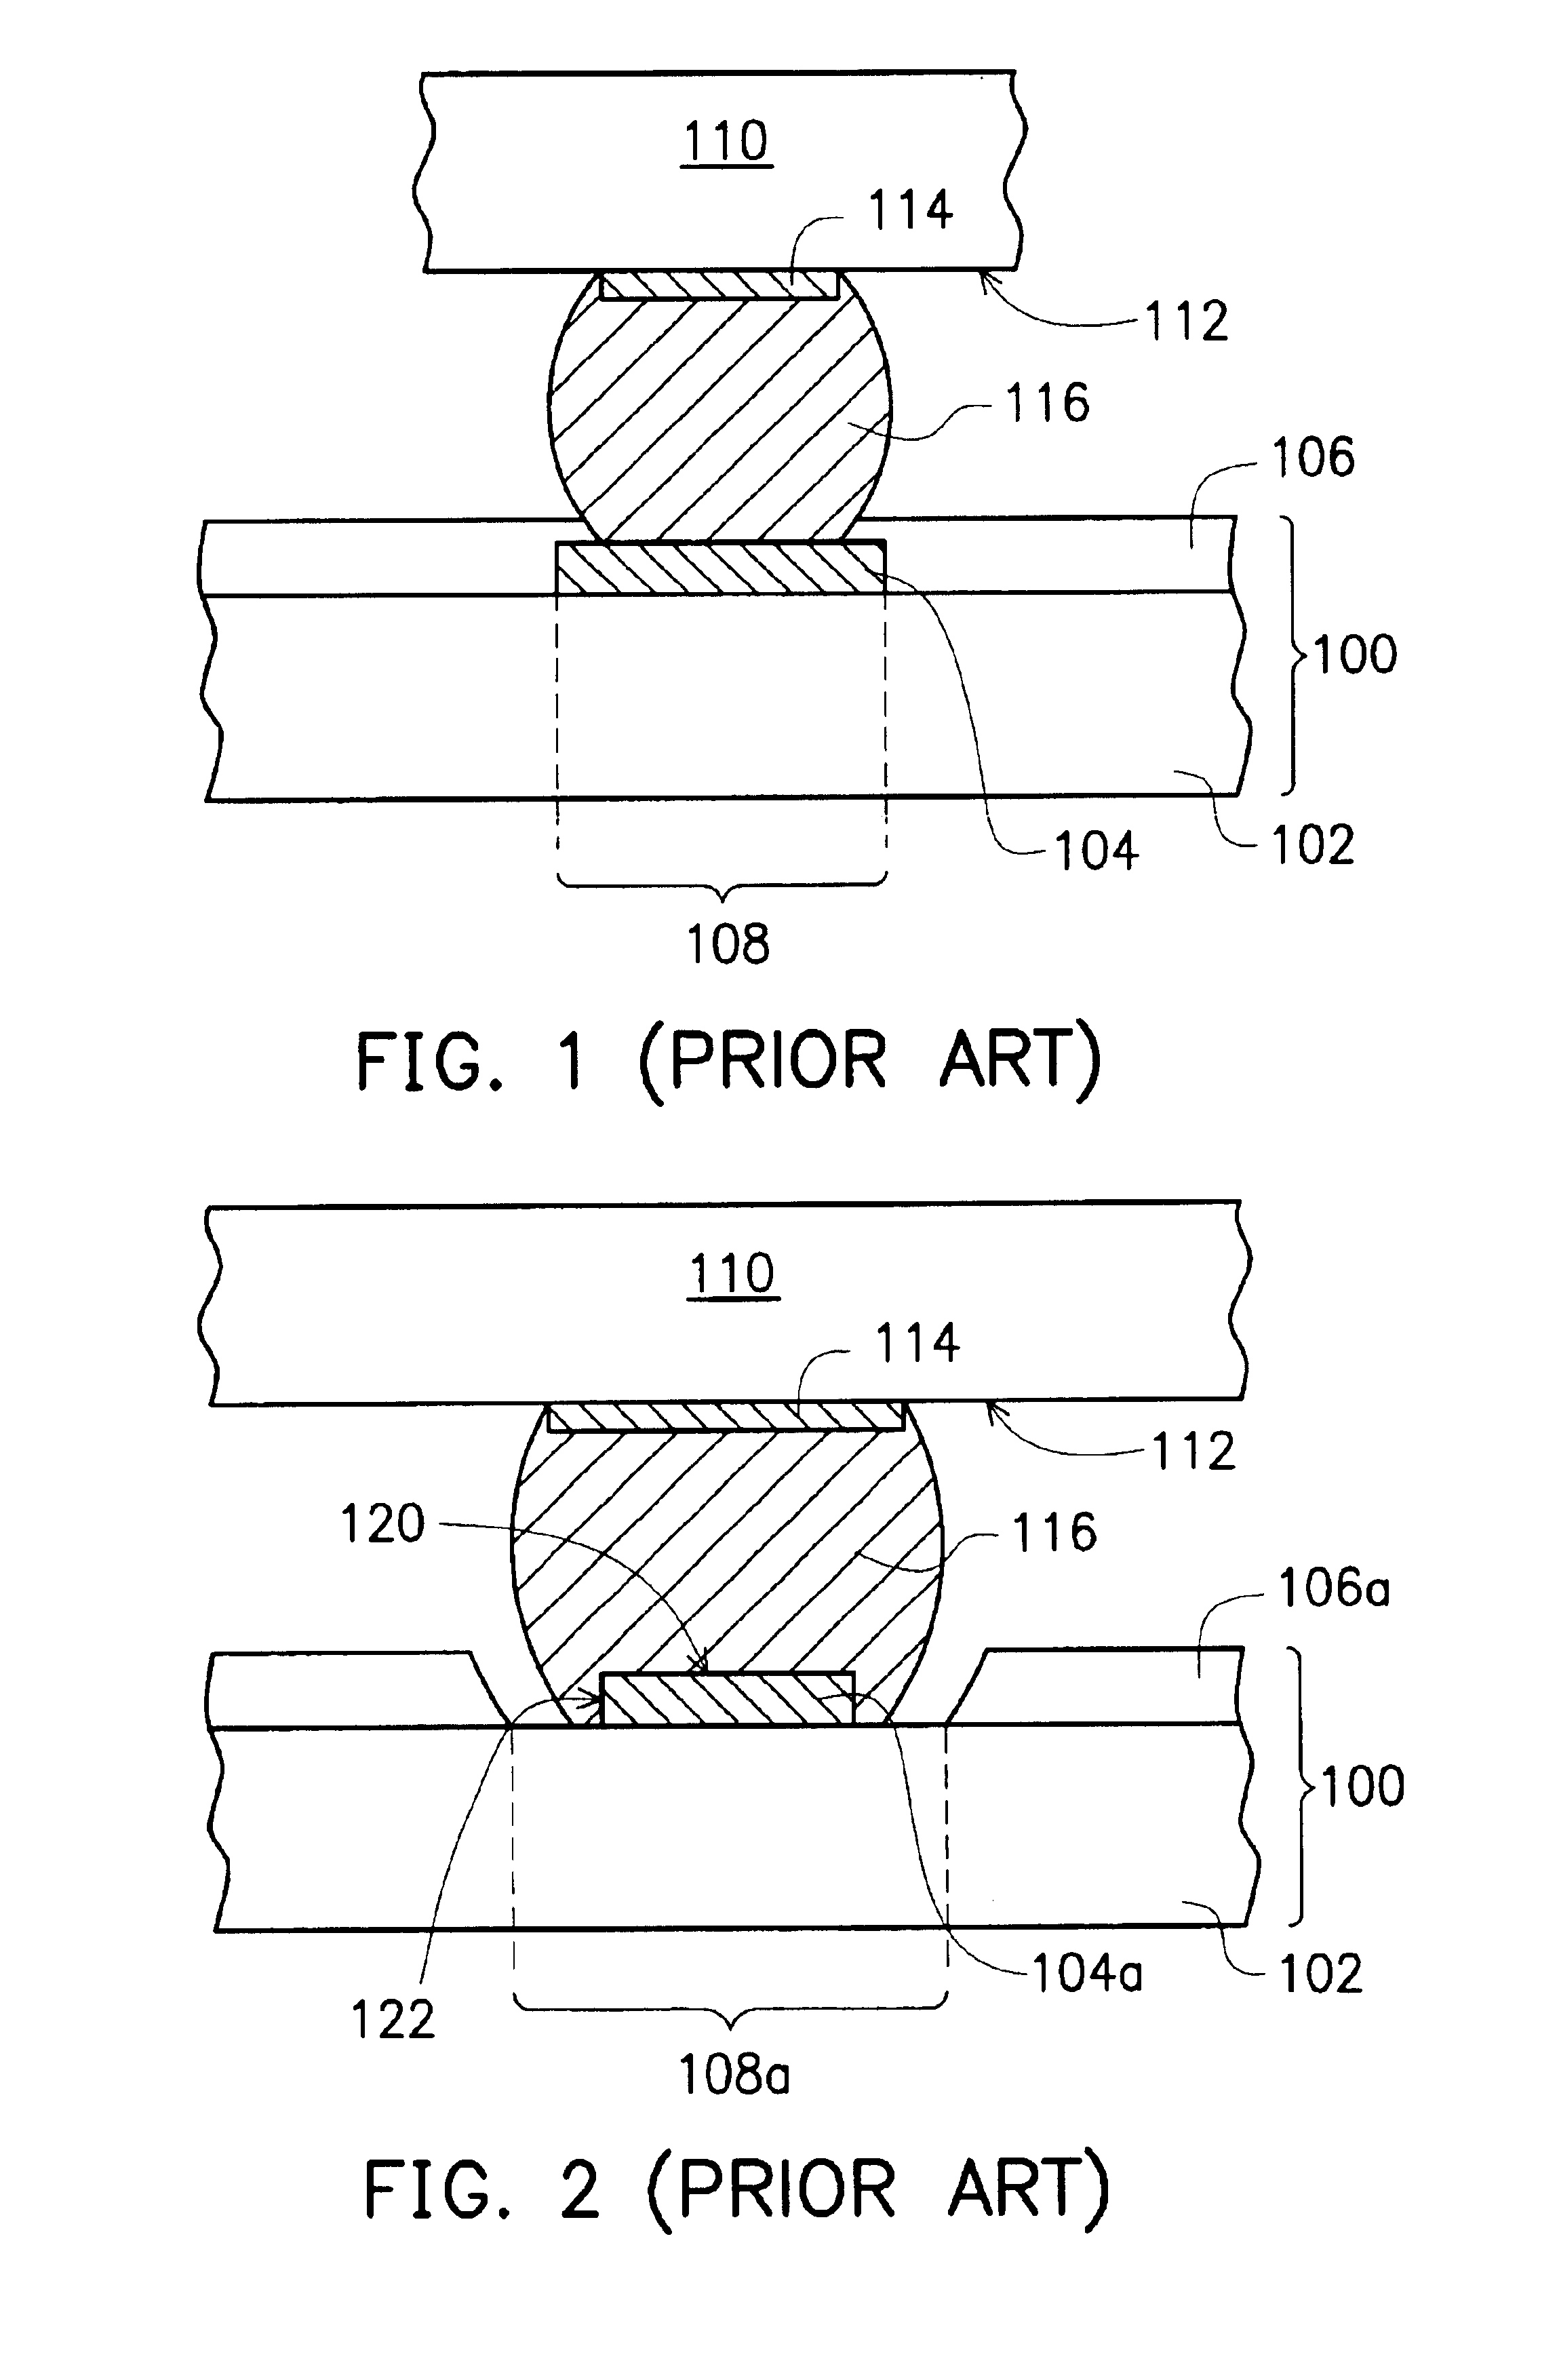 Substrate structure of flip chip package